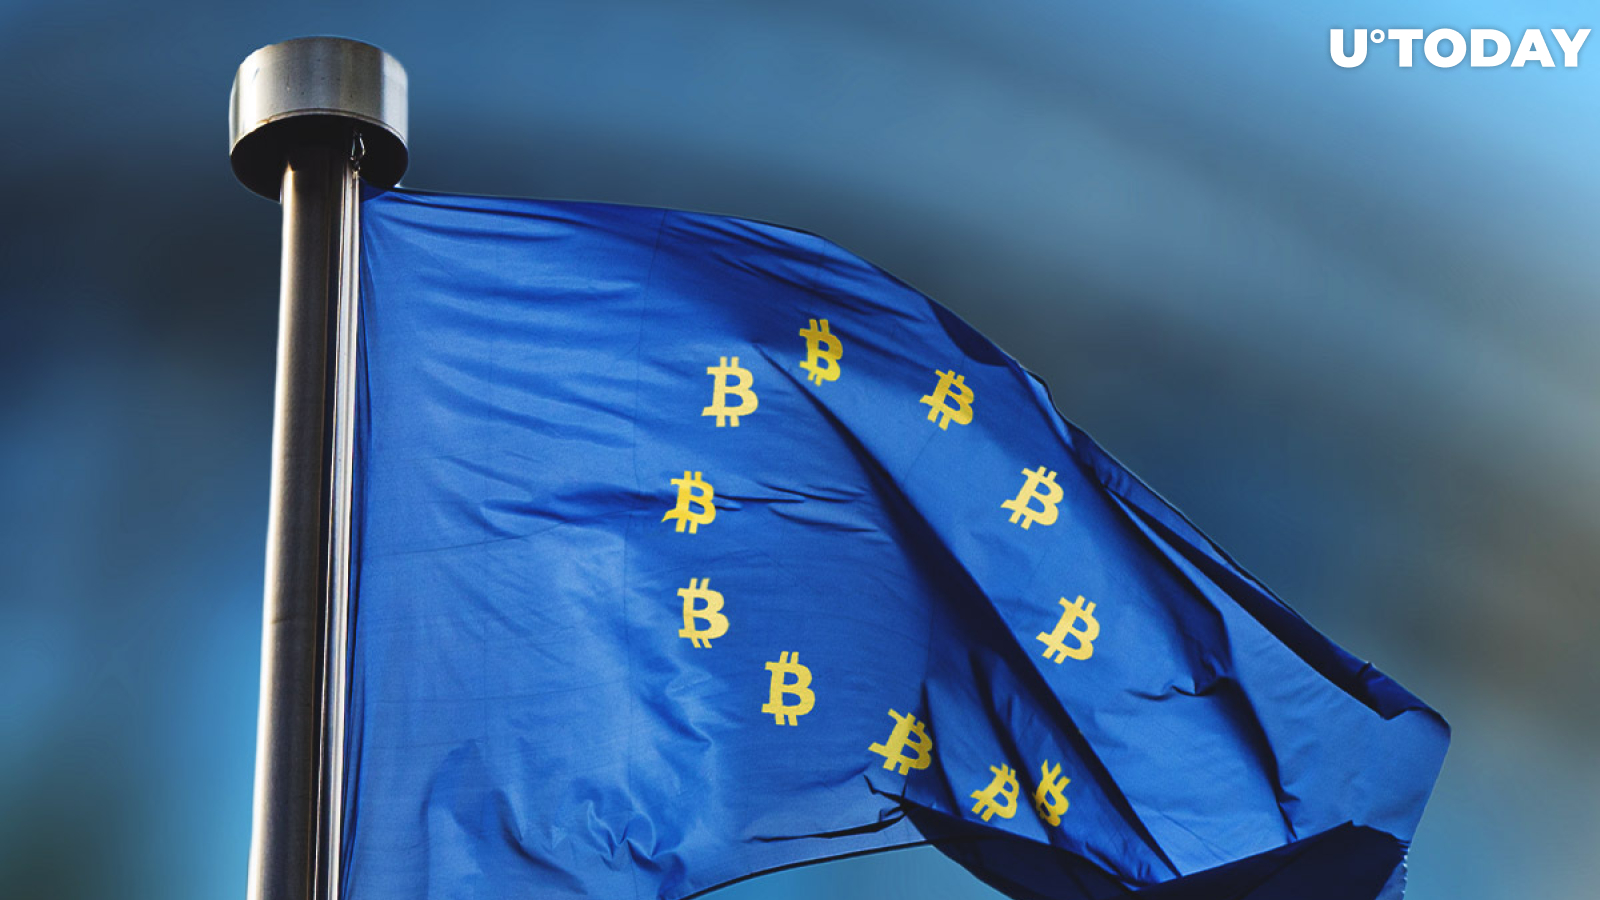 Crypto Assets "Highly Risky, Speculative, Unregulated," Top European Regulator Claims